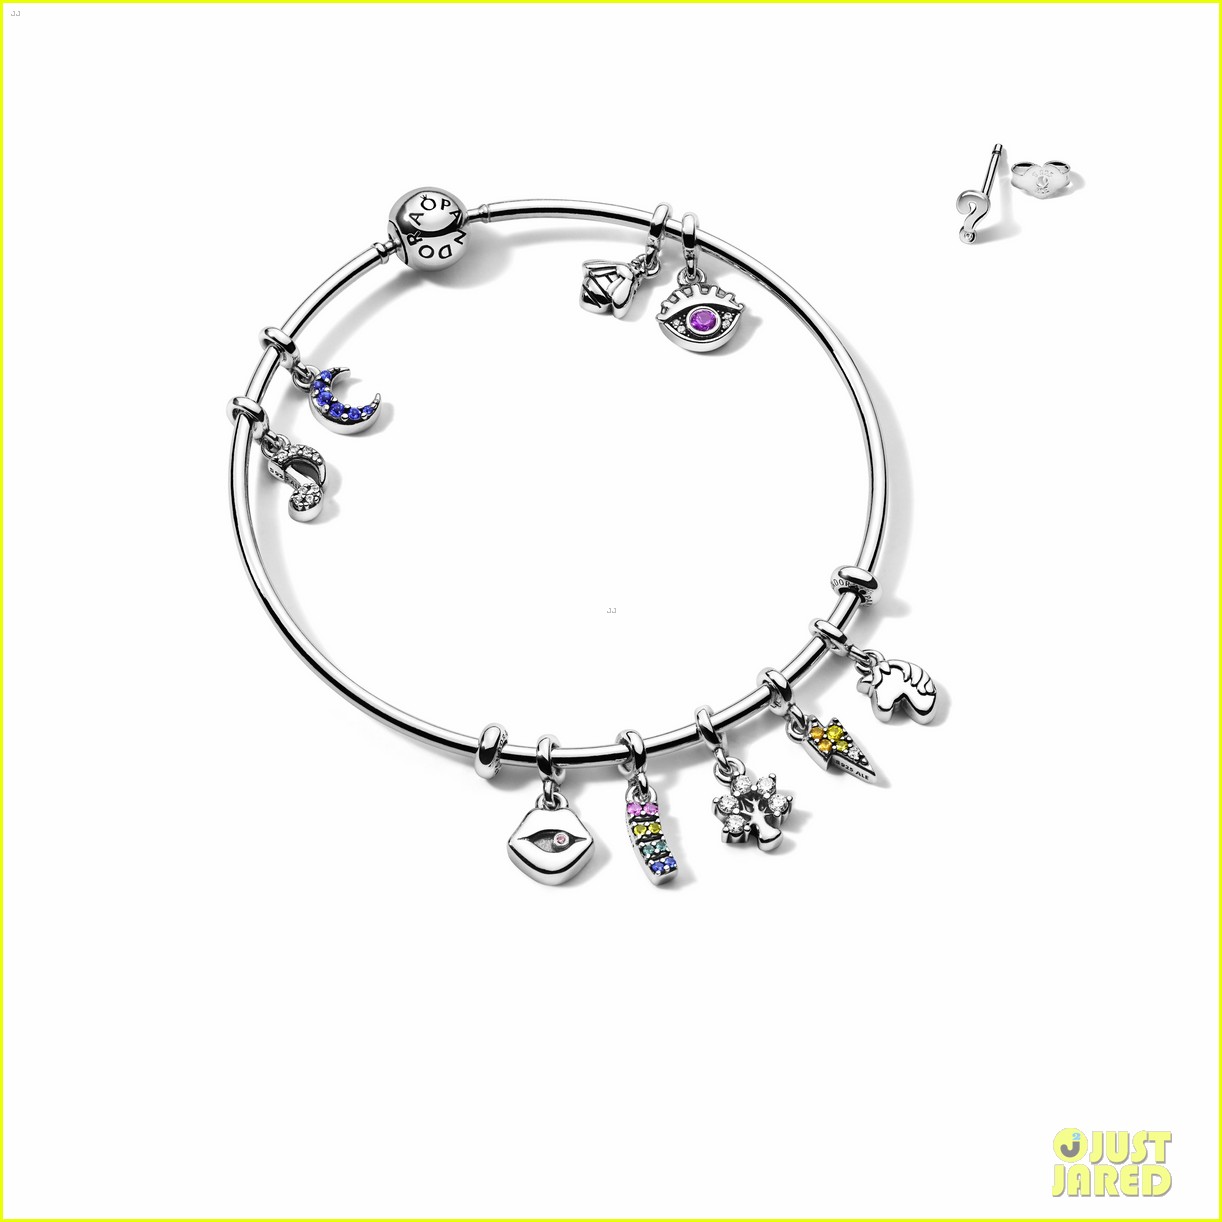 Millie Brown Pandora's New Jewelry Collection, Pandora Me: Photo 4360185 | Fashion, Millie Bobby Brown Pictures | Just Jared